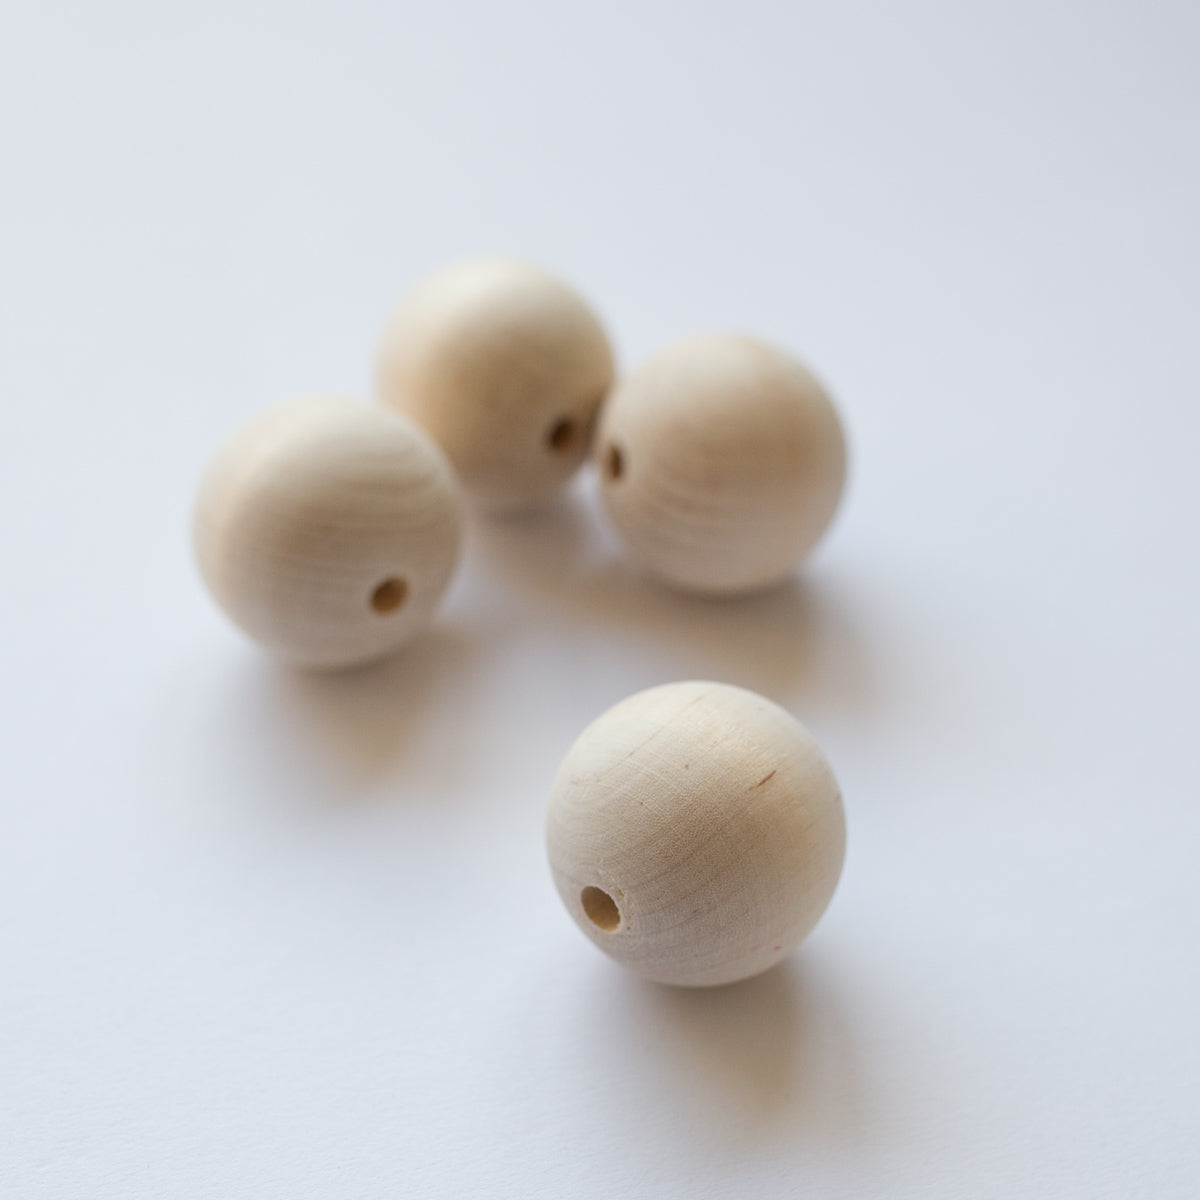 Wooden beads 40mm 4 pc.